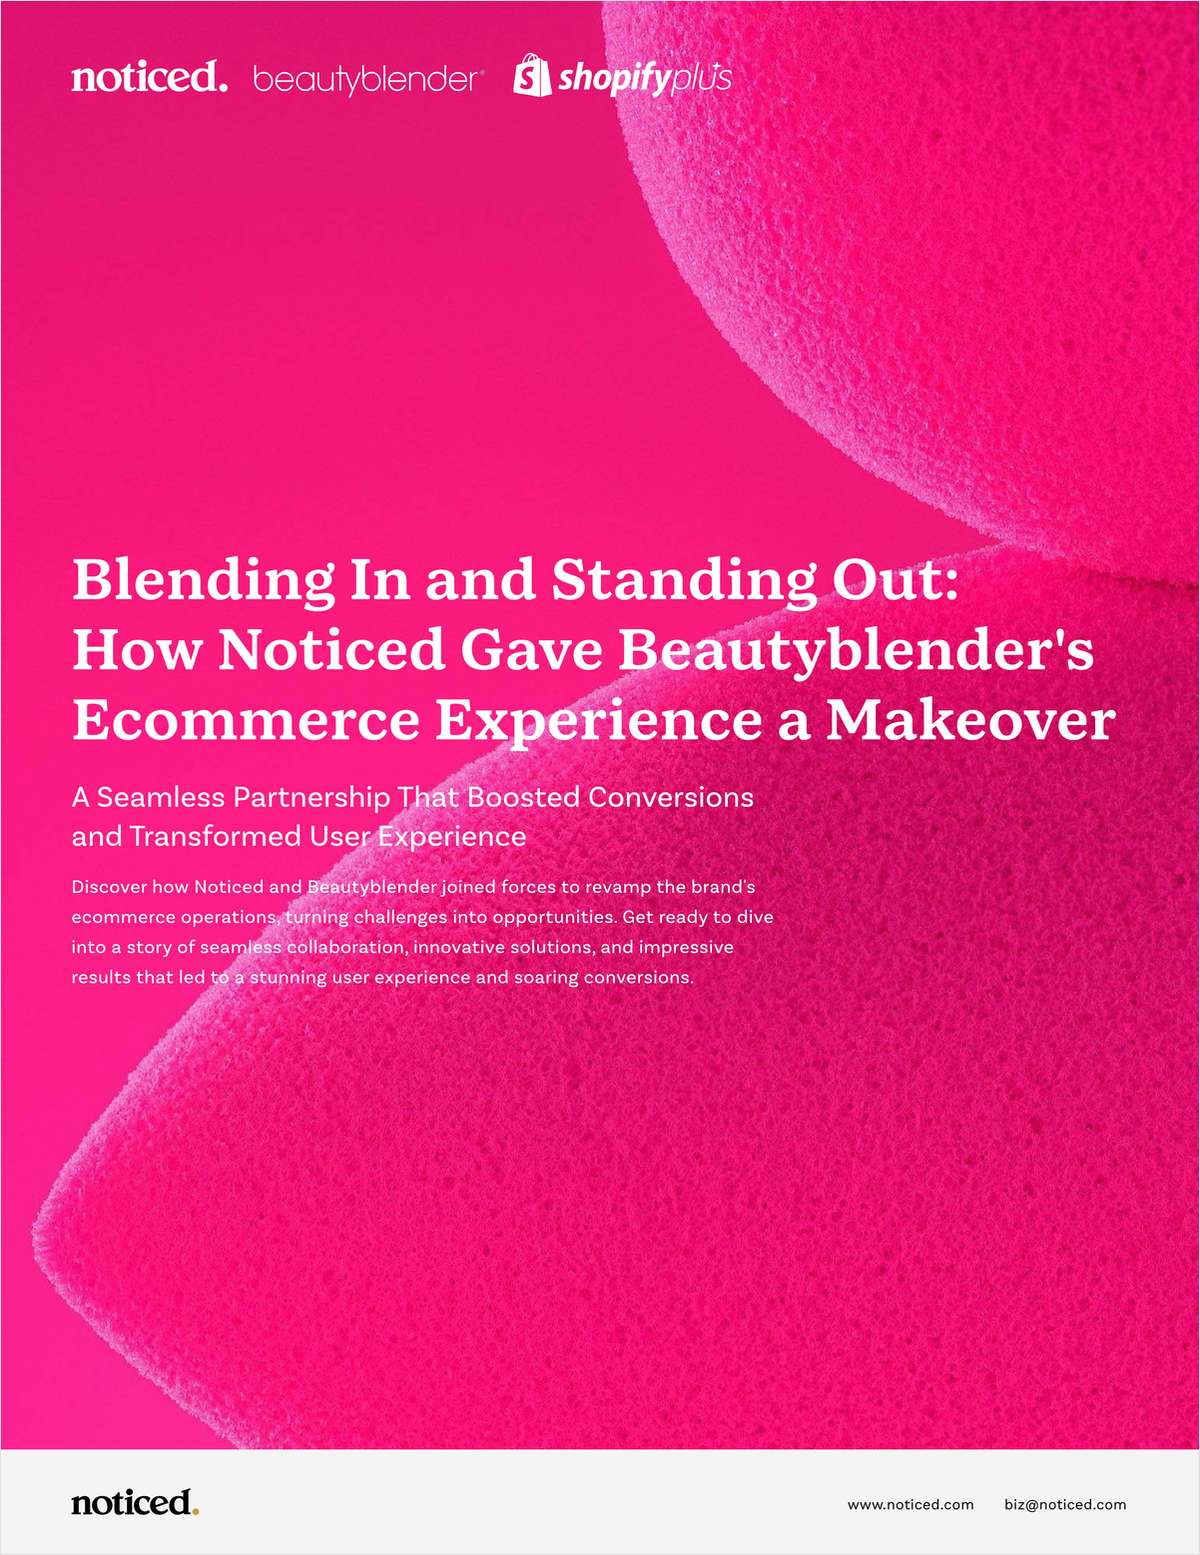 How Noticed Gave Beautyblender's Ecommerce Experience a Makeover